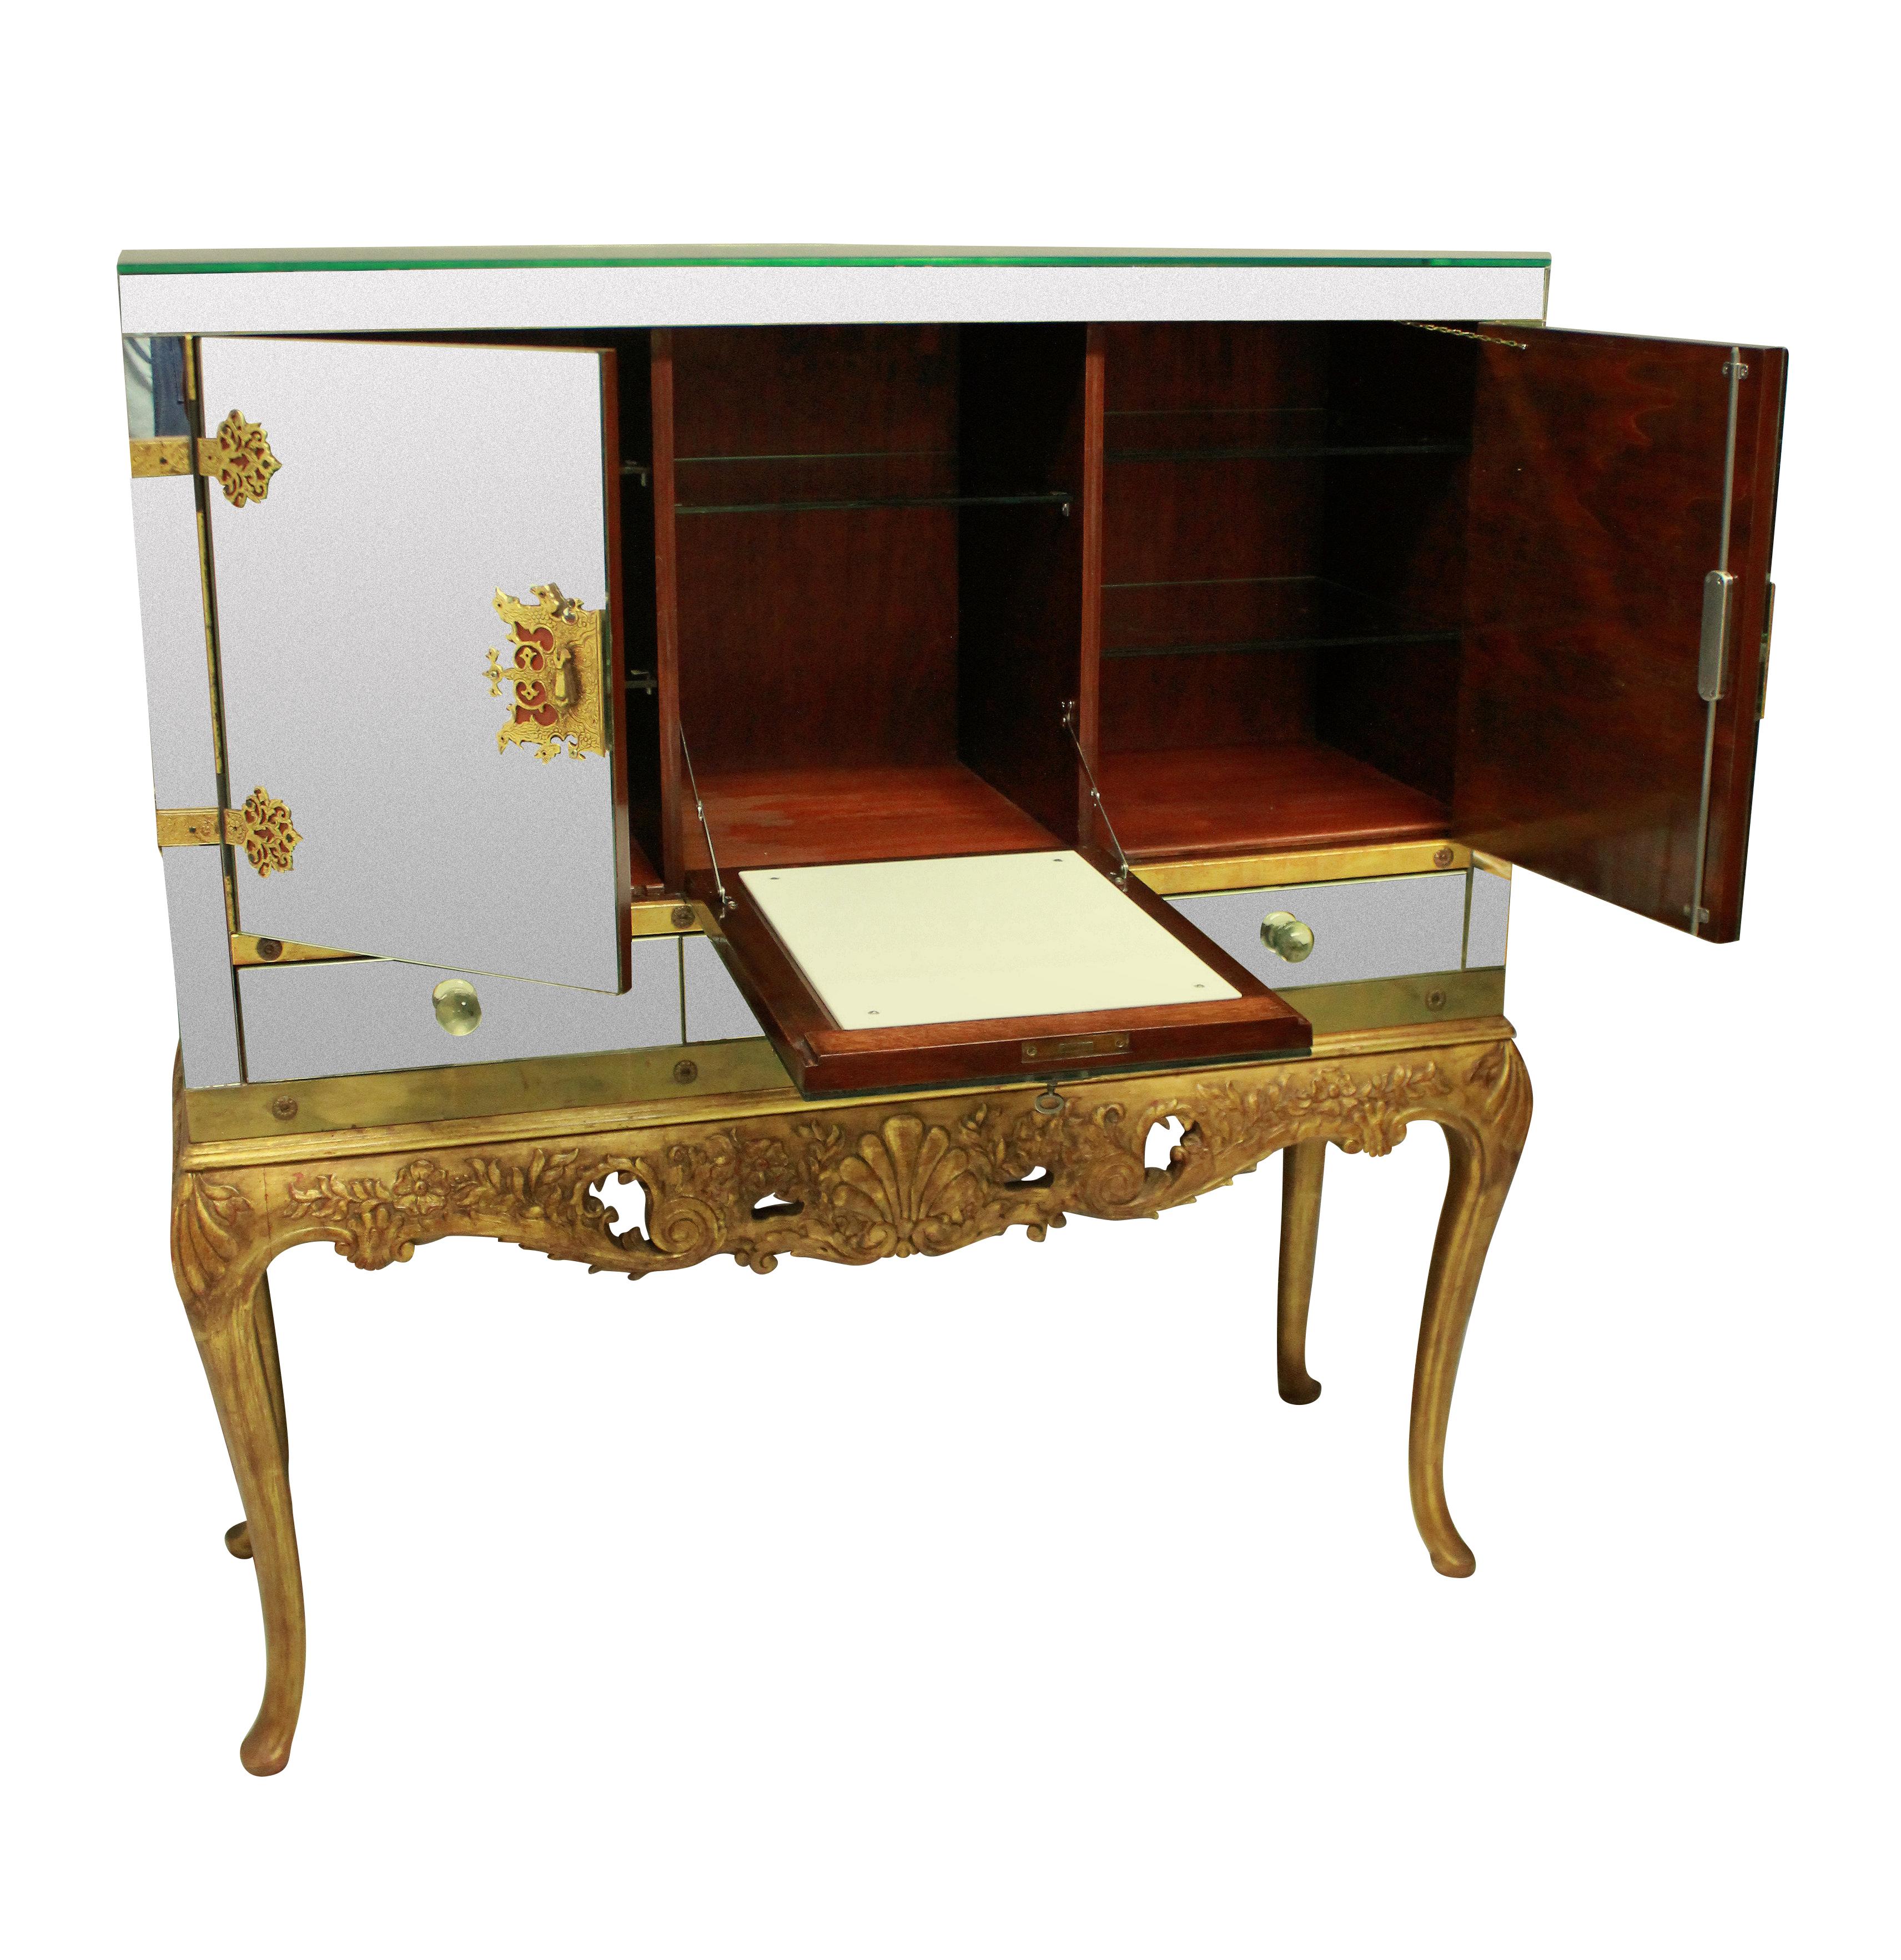 A large and impressive American bar cabinet in the chinoiserie taste. The upper section of good quality with mirror panels throughout resting upon a carved and gilded base. The intricate locks and hinges in gilt bronze with working locks and keys